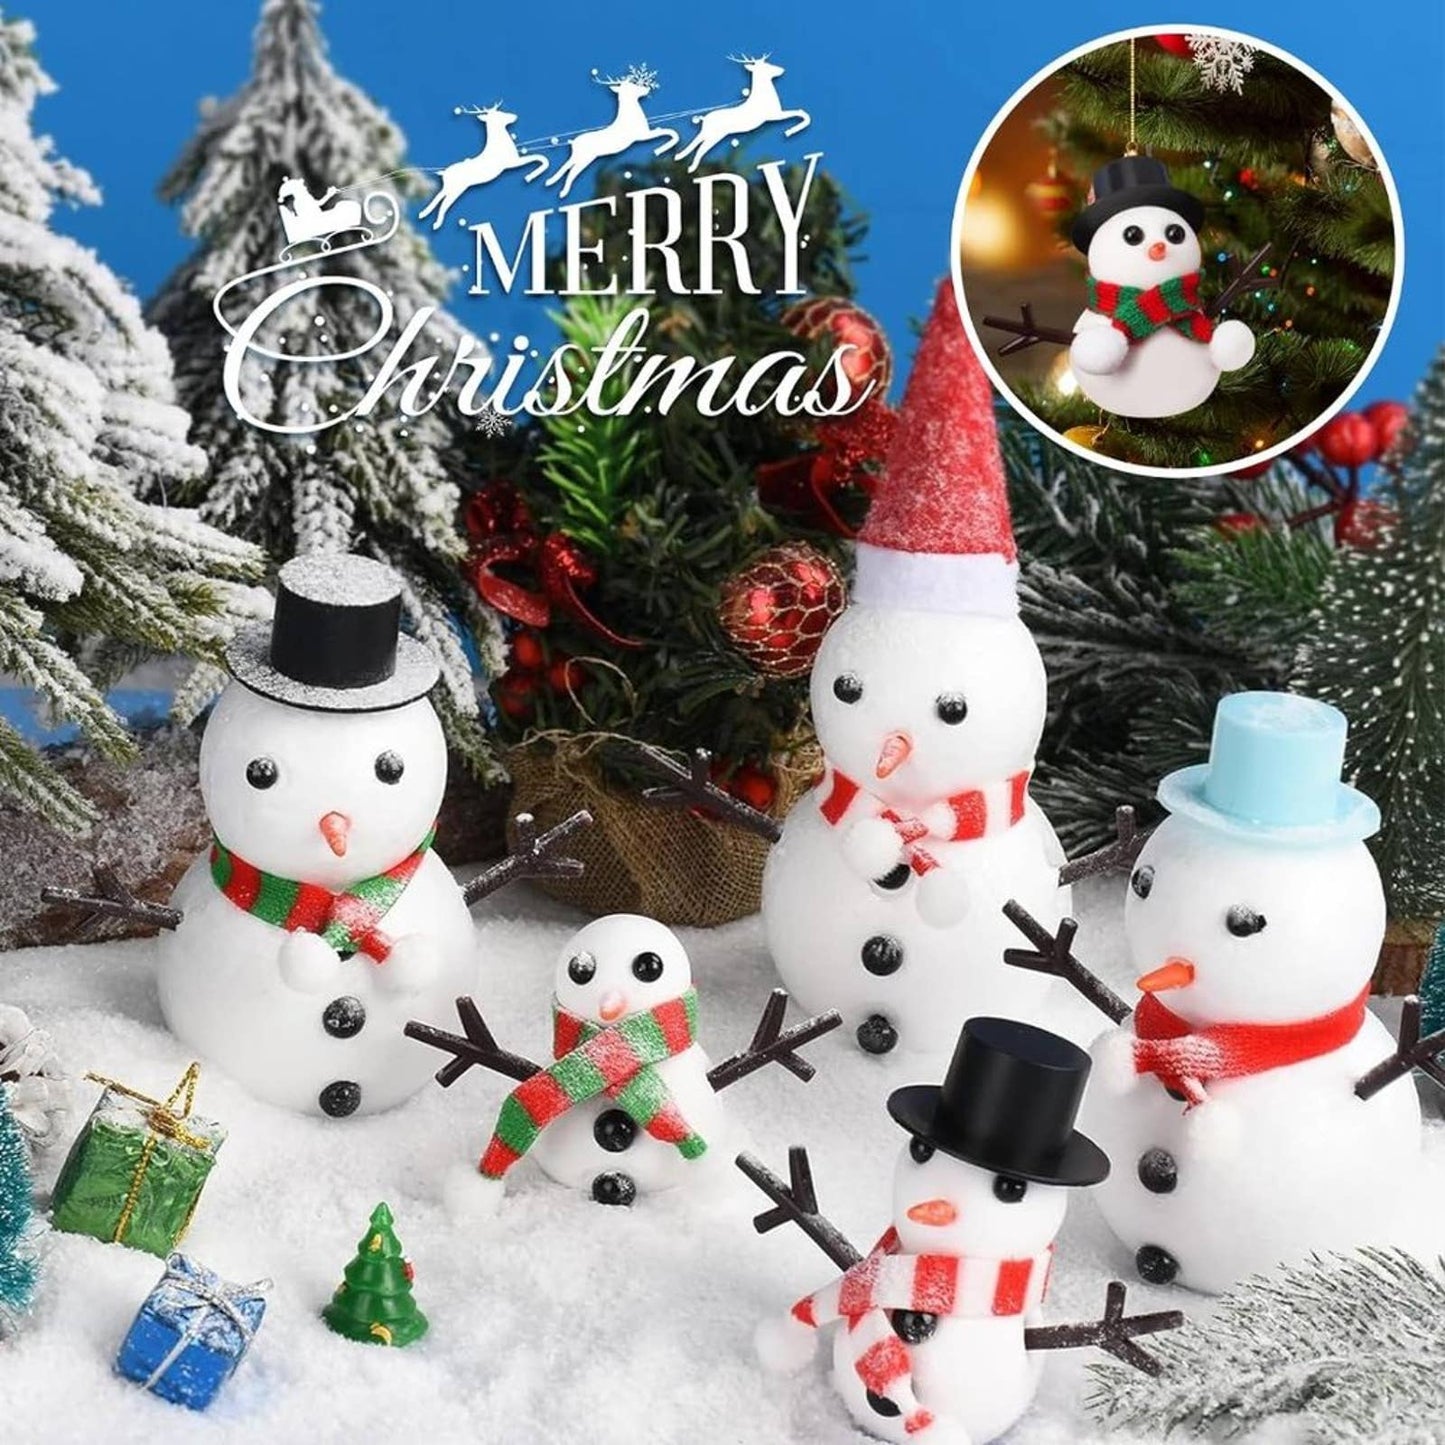 Christmas Crafts Xmas Gifts,Molding Clay Snowman DIY Kit,9Pack Build a Snowman